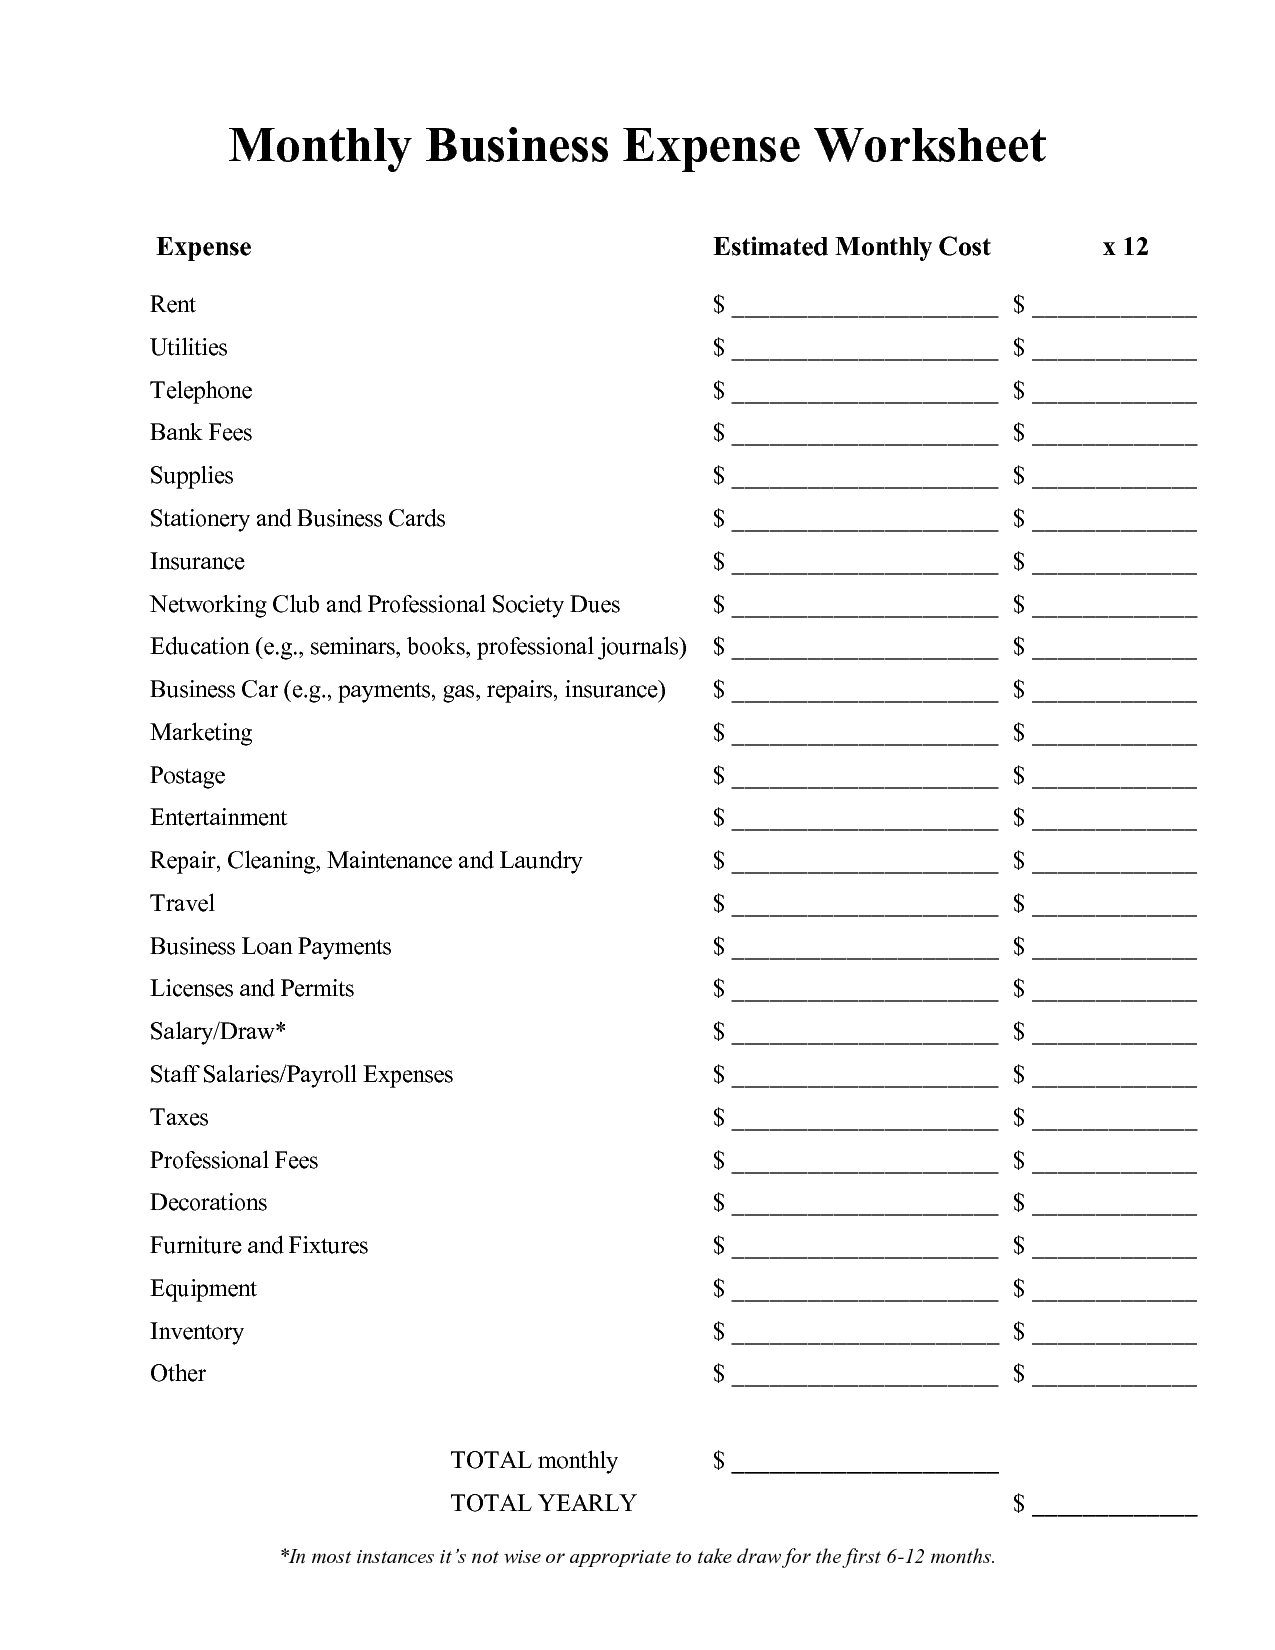 Monthly+Business+Expense+Worksheet+Template | Business intended for Monthly Bills Worksheet